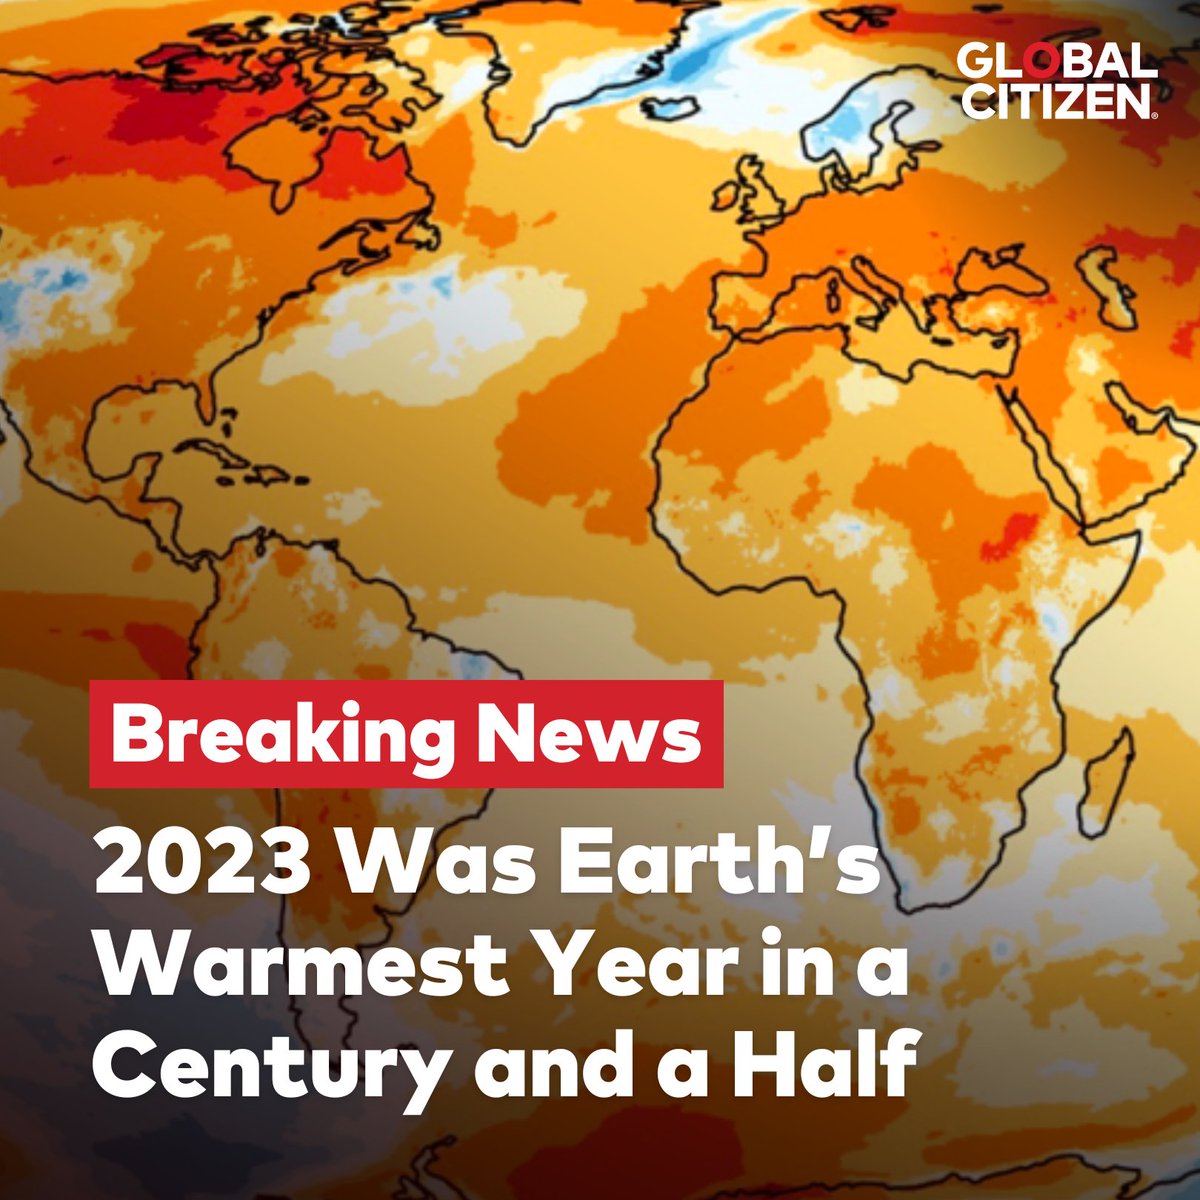 2023 is officially the hottest year on record, with a global average temperature of 14.98 degrees Celsius (58.96°F). As global temps approach the warming limit, we must urge world leaders to implement changes to protect our planet. Sign the petition now: globalcitizen.org/en/campaign/po…